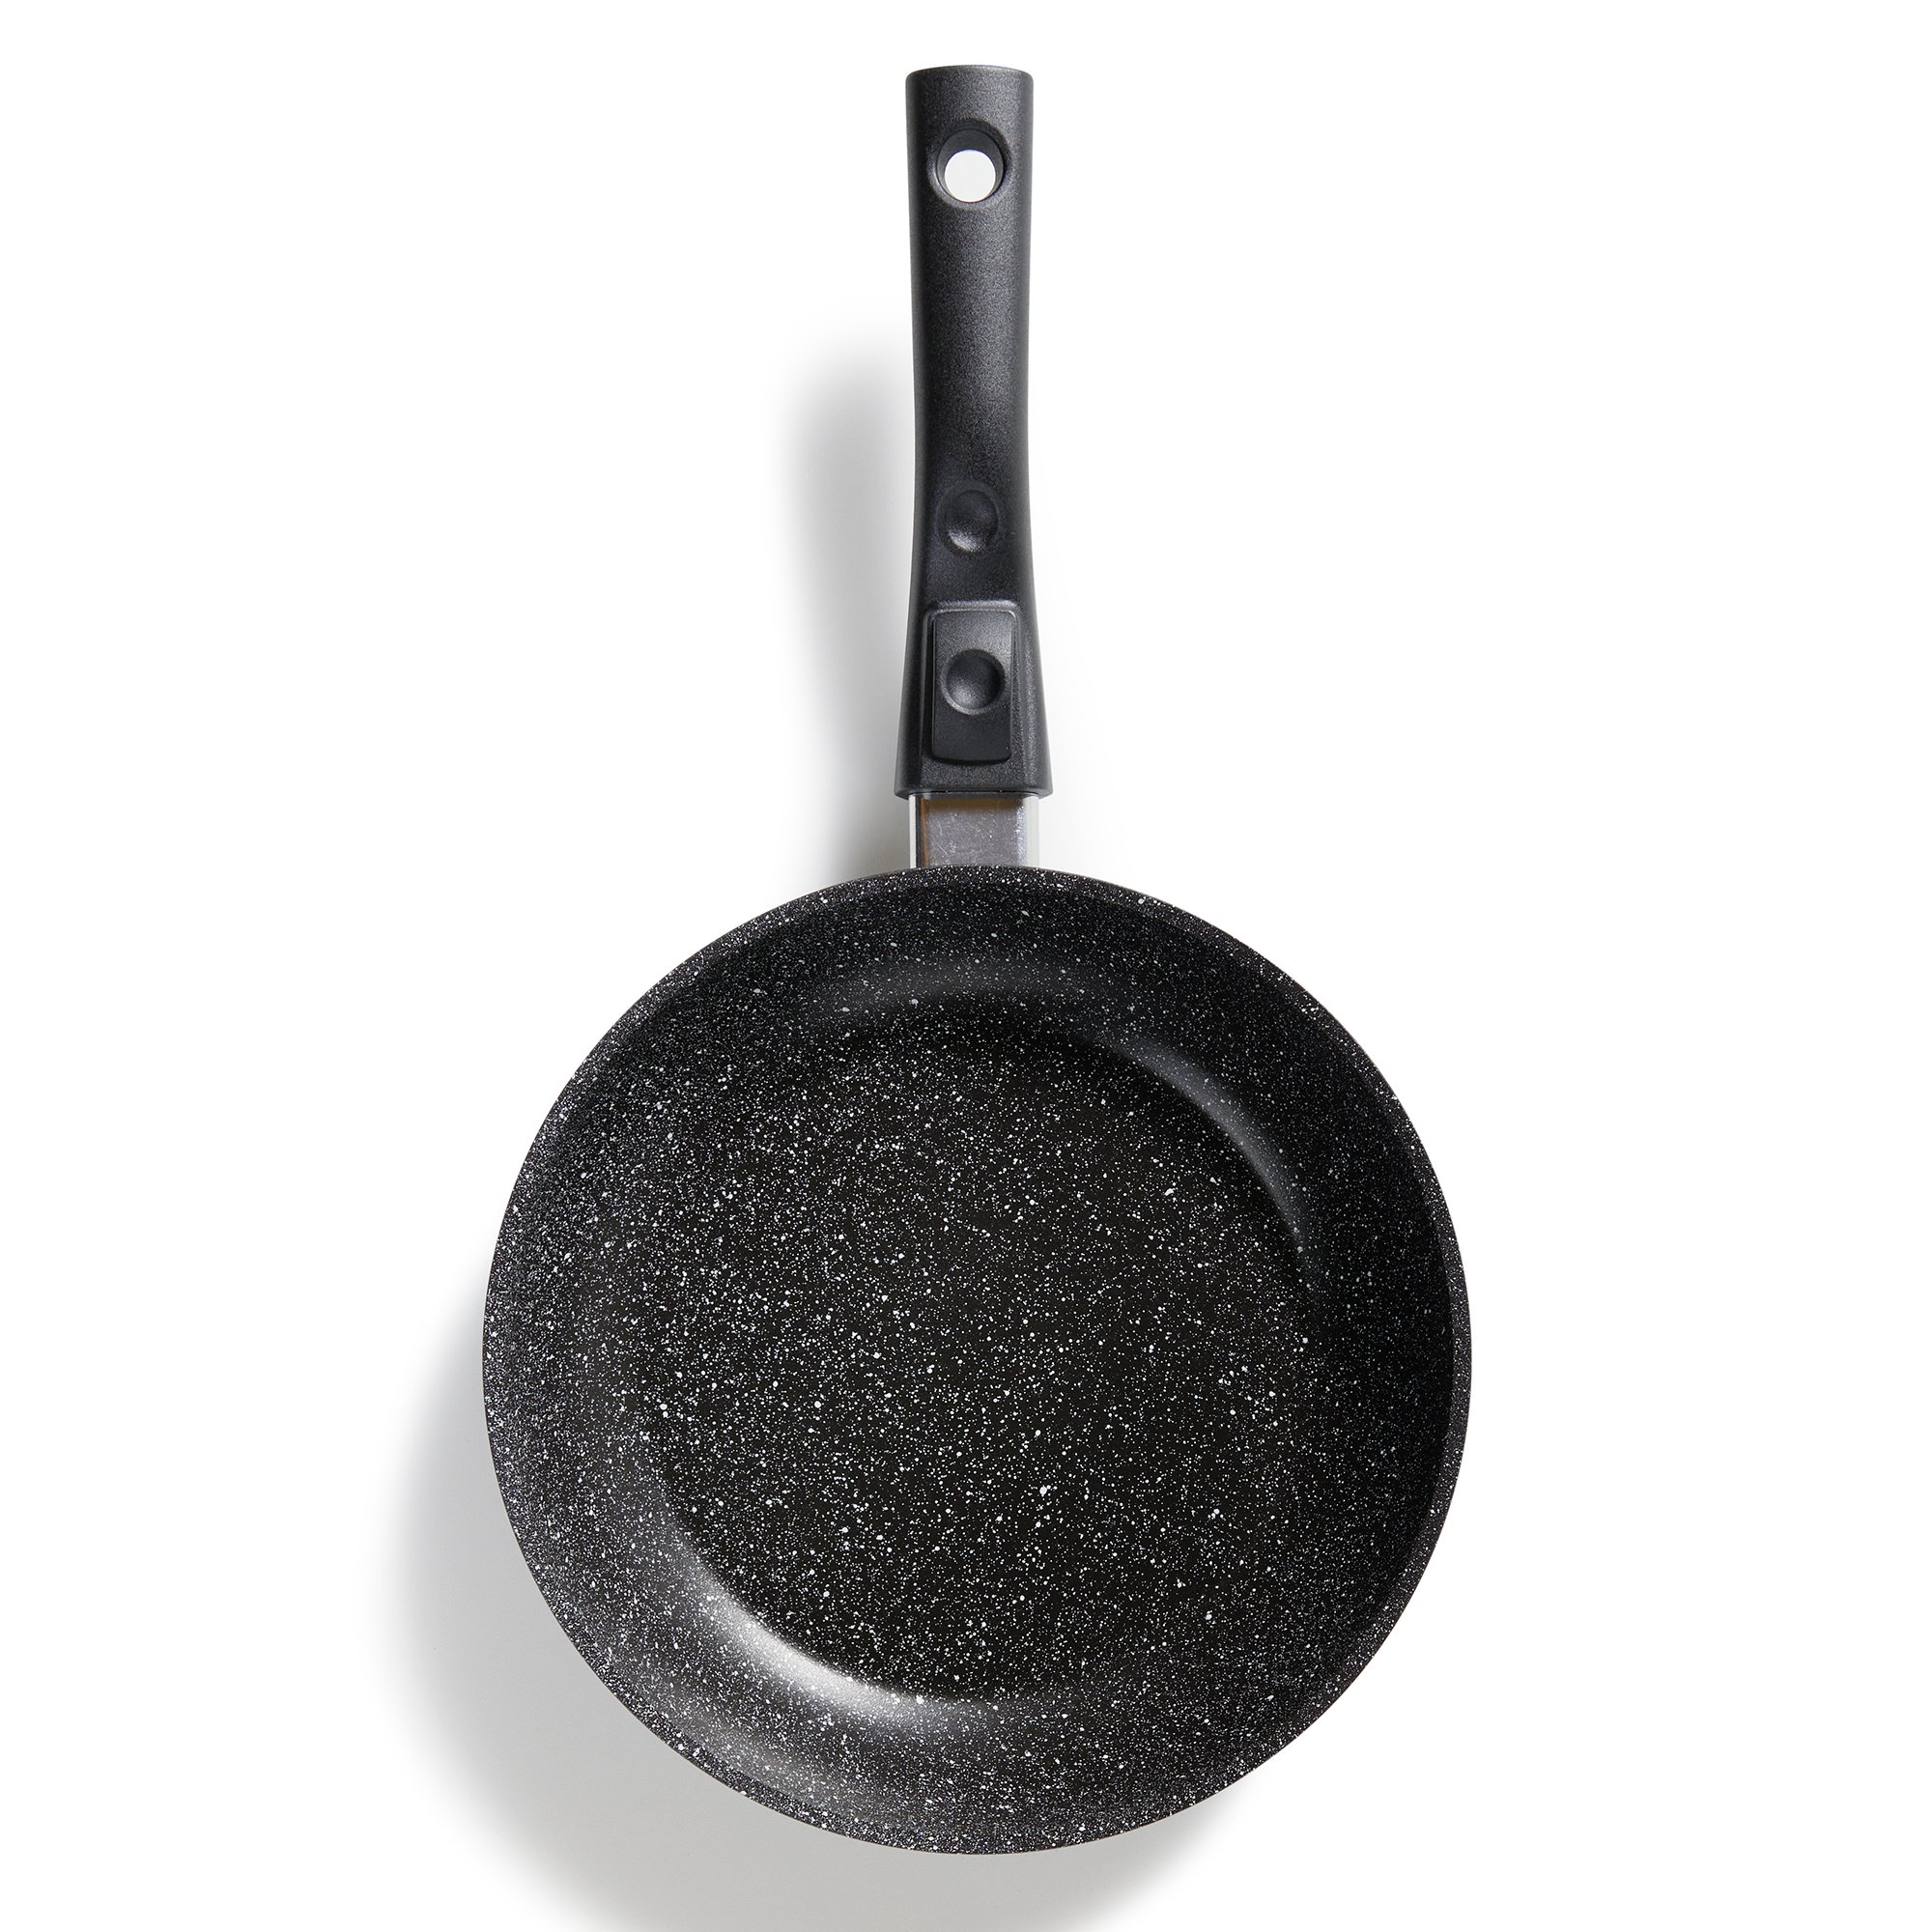 STONELINE® frying pan 24 cm, Made in Germany with removable handle, induction and non-stick coated